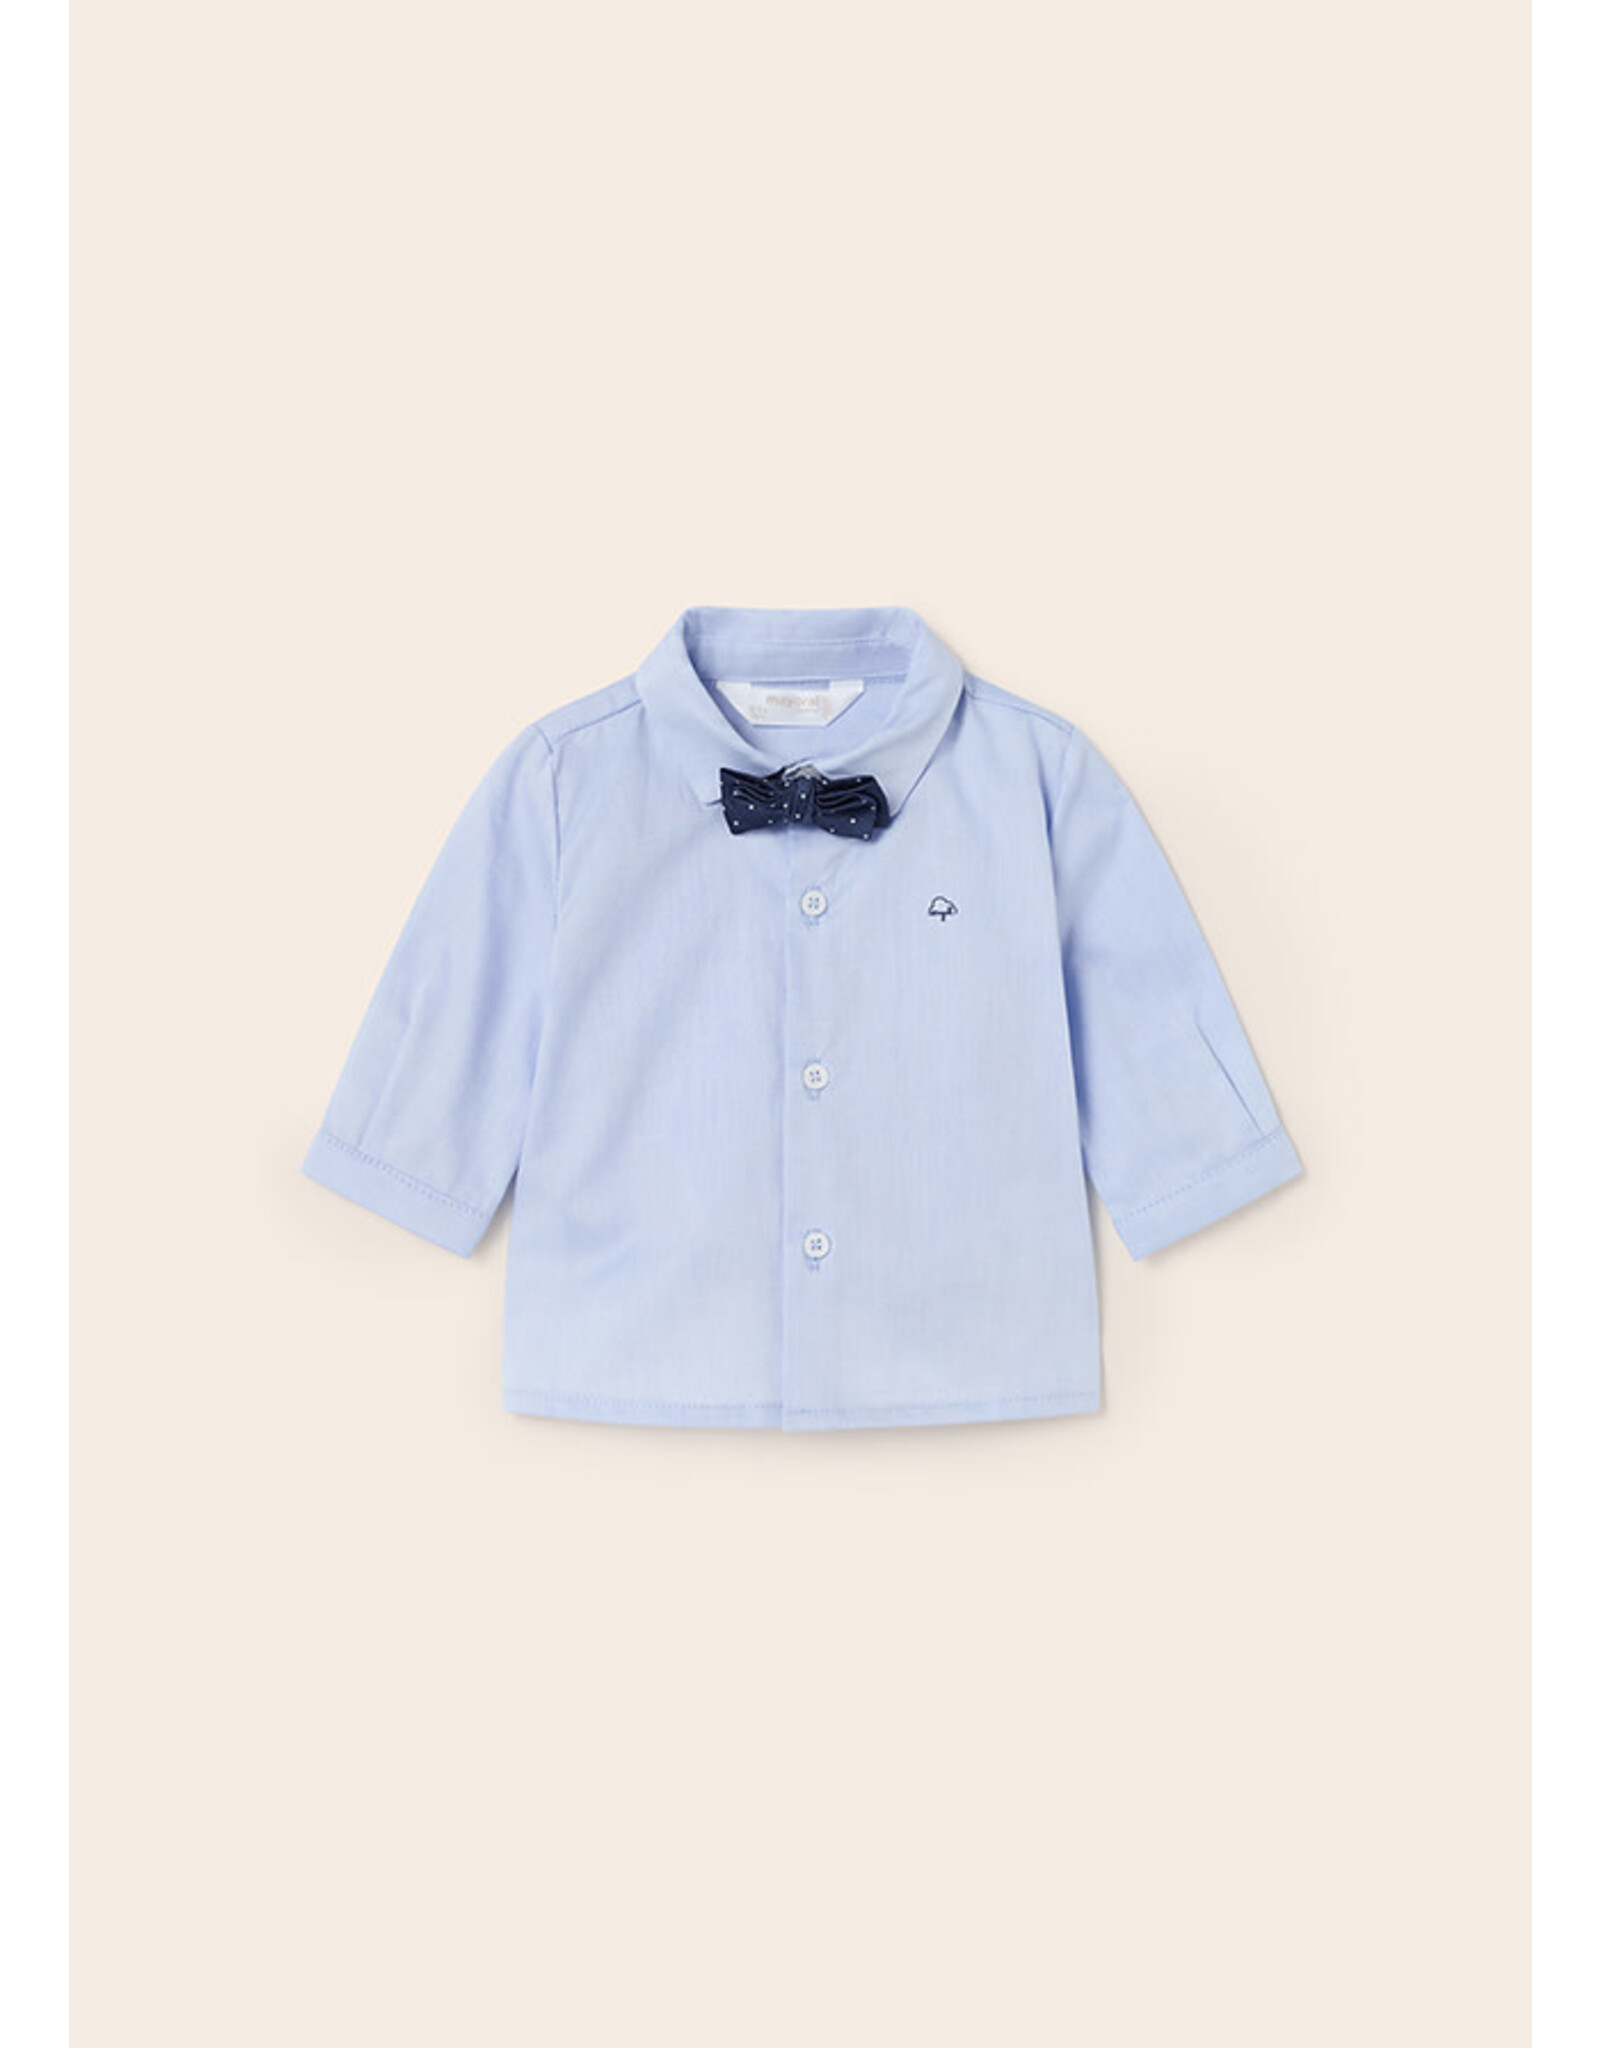 Mayoral Lightblue Button Up with Bowtie